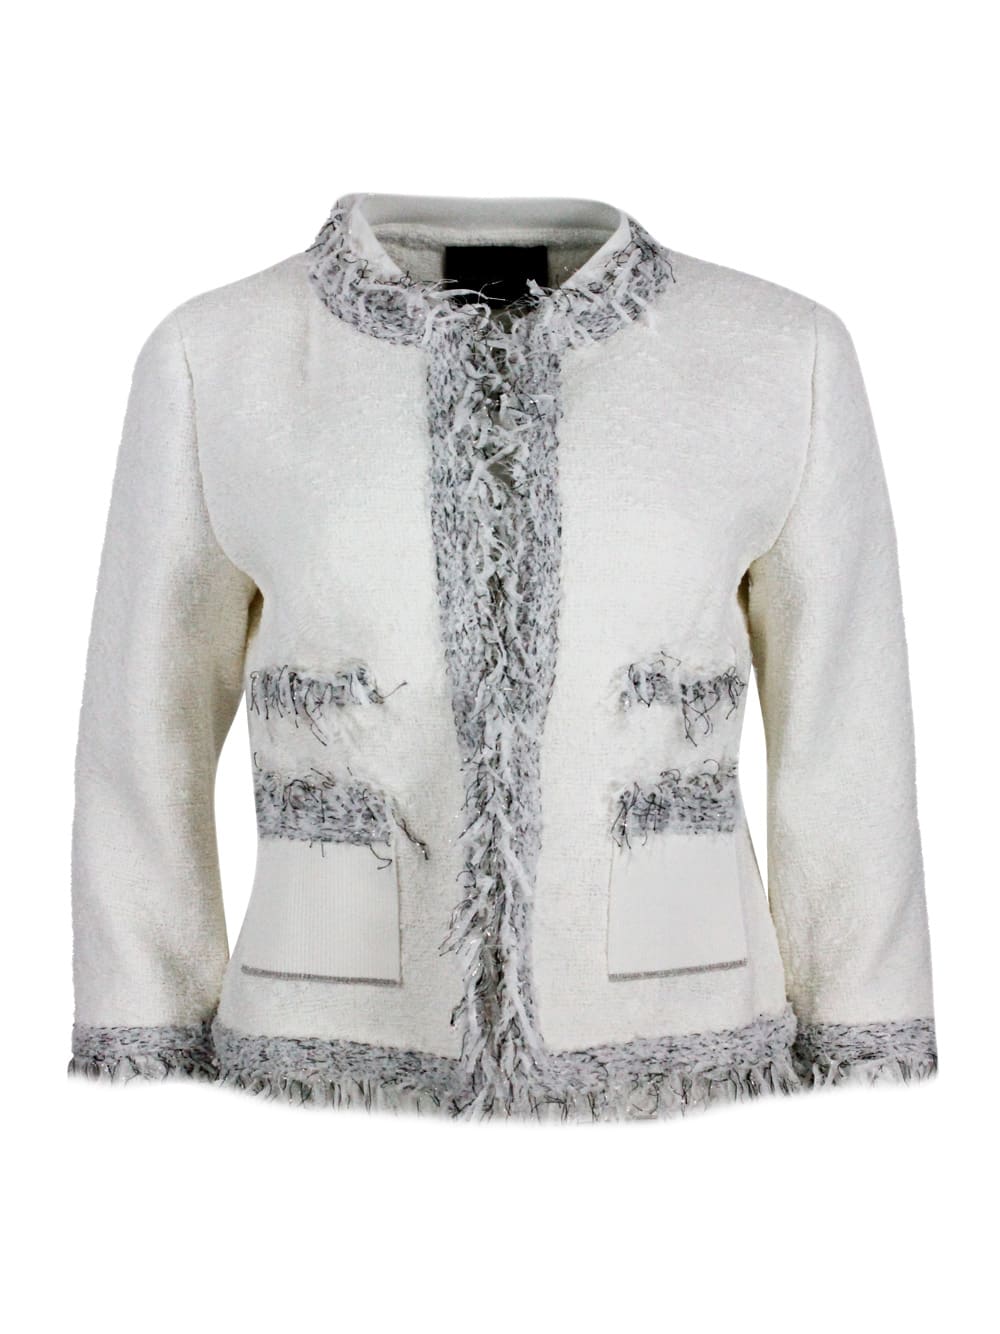 Chanel-style Jacket With Long Sleeves And Mandarin Collar In Worked Cotton With Ribbon Applications On The Edges